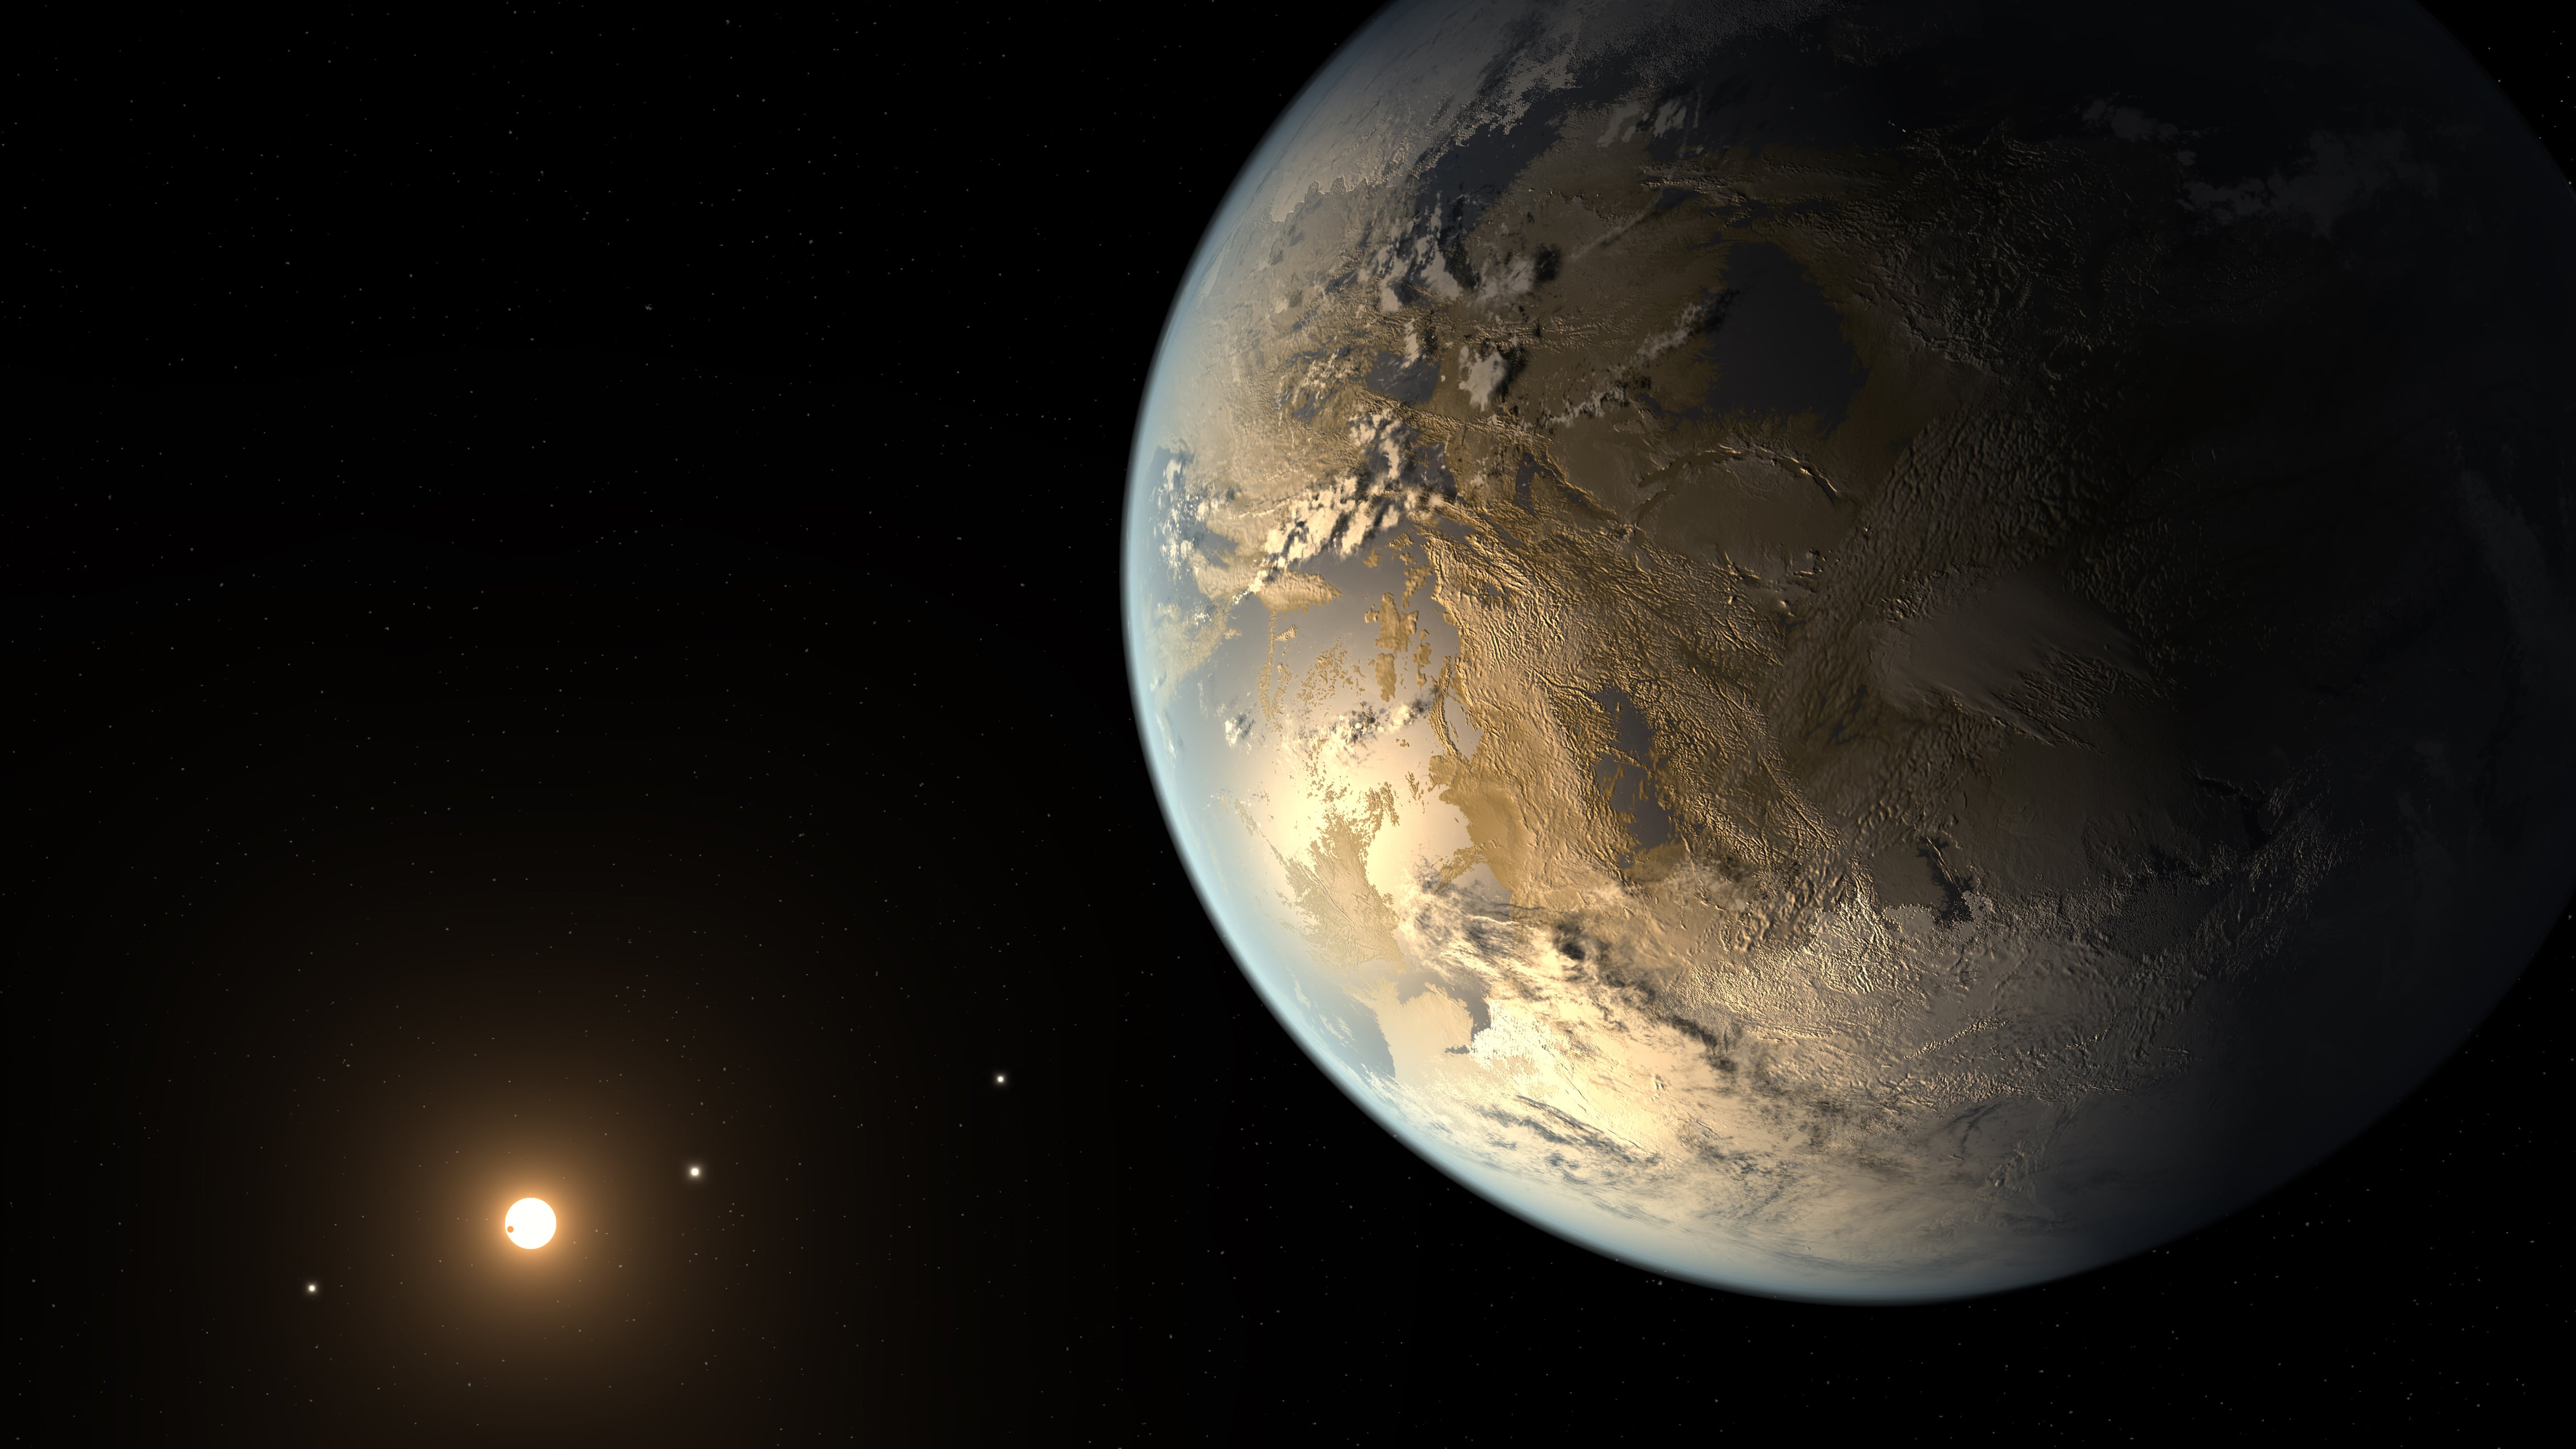 Representation of the planet Kepler-186f, one of the most Earth-like planets found to date, orbiting a dwarf star smaller than the Sun.